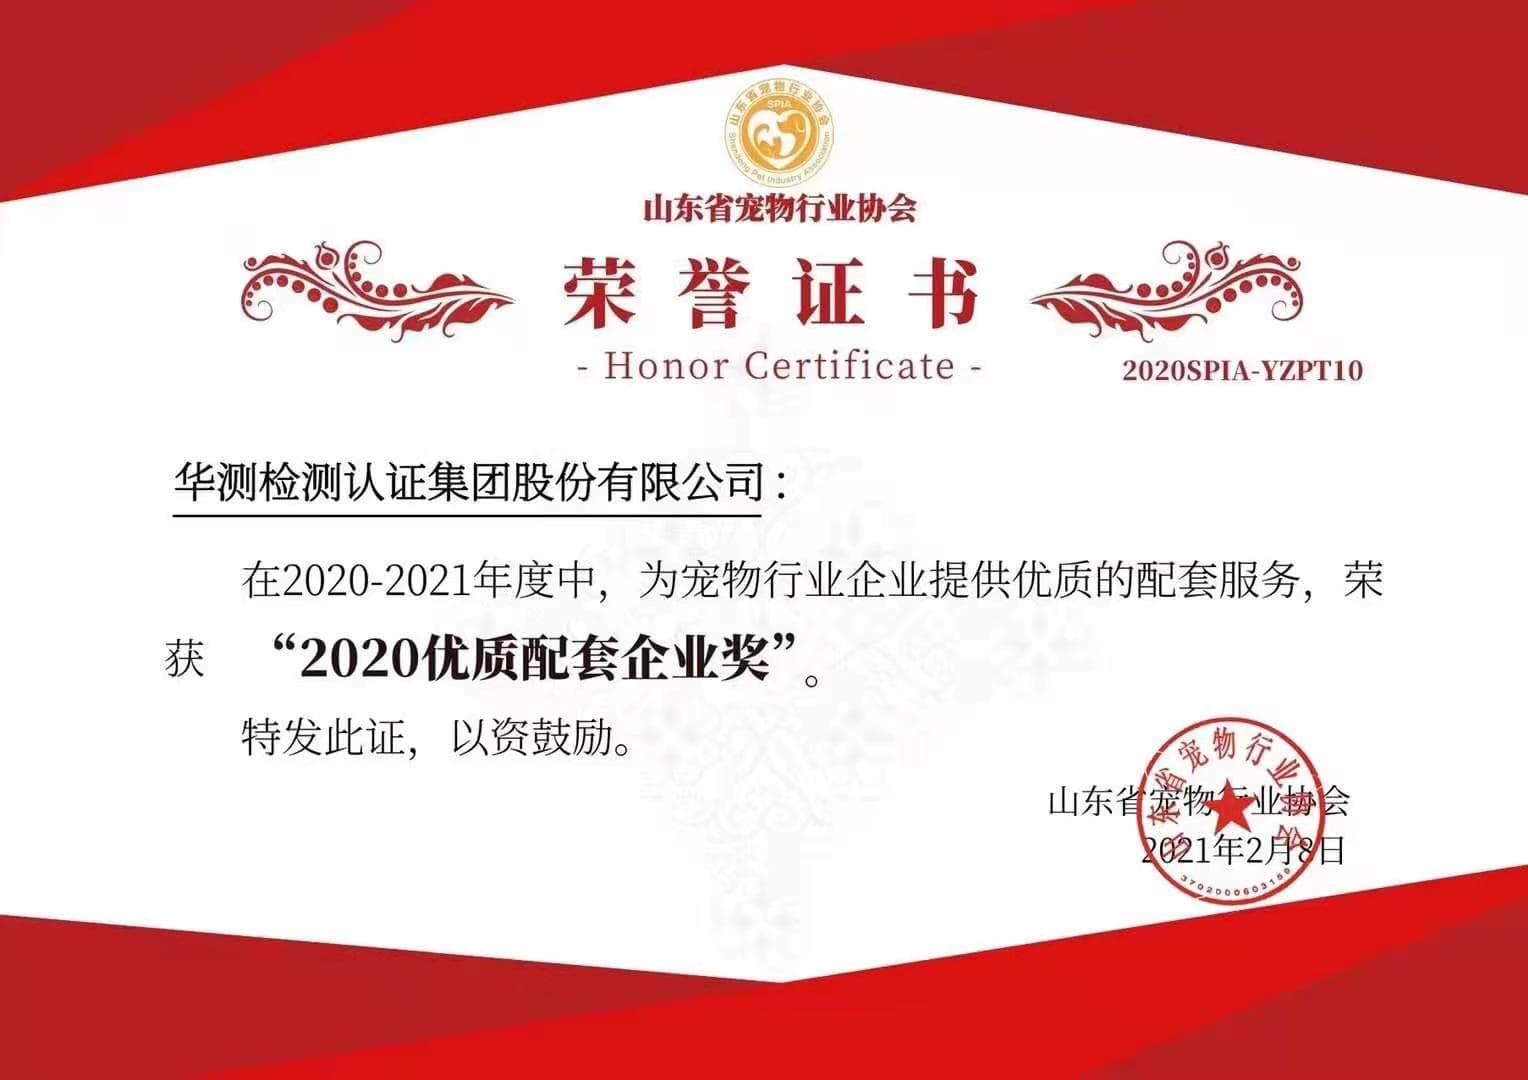 2020 Quality Supporting Enterprise-Shandong Pet Industry Association